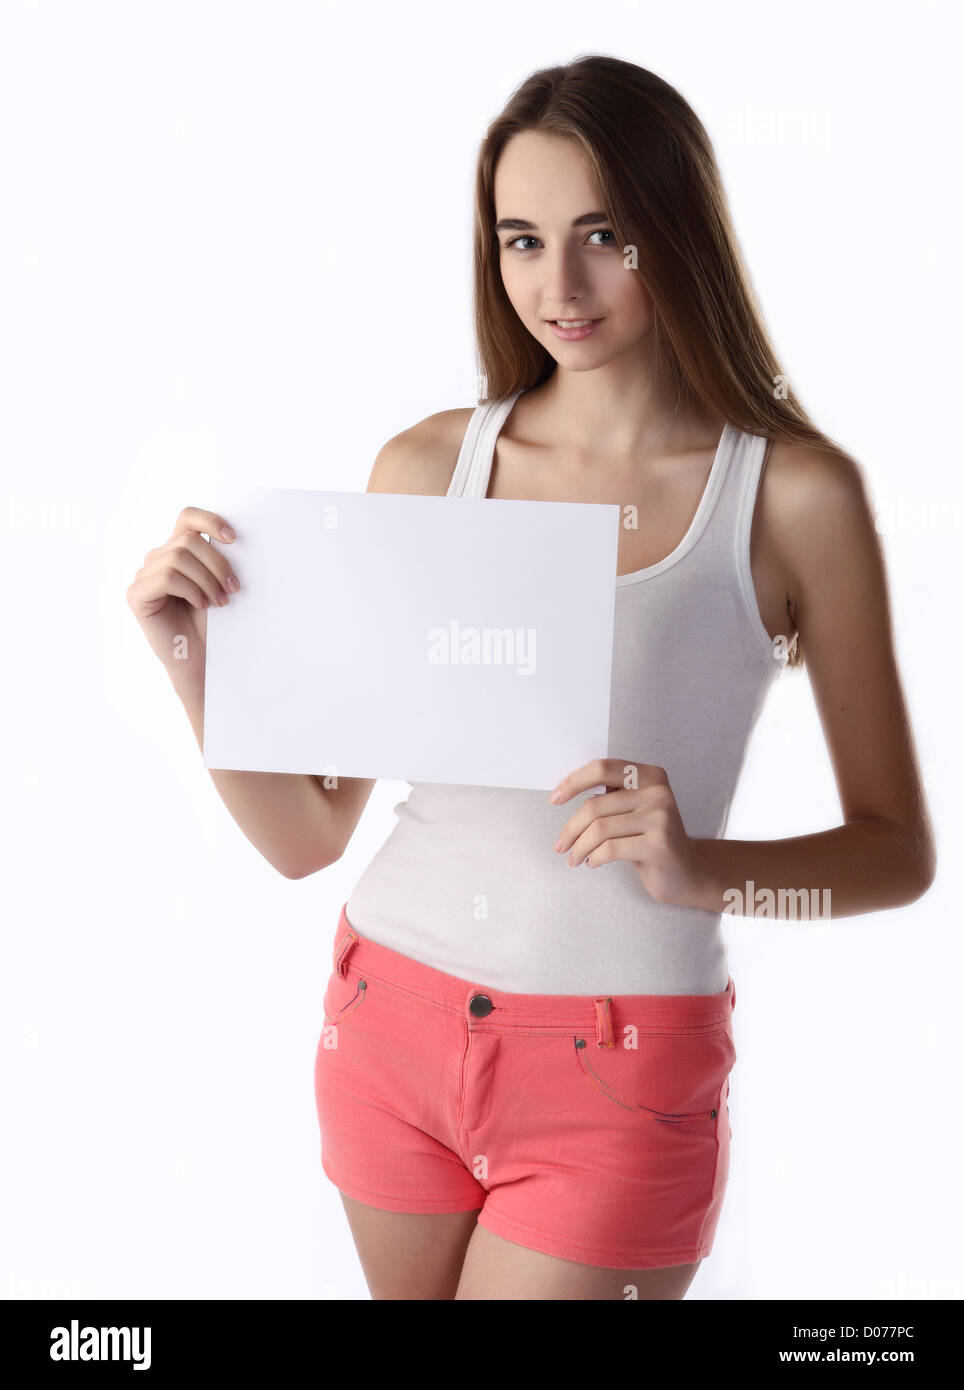 isolated on white: teenager girl smiling and holding paper blank on the white background Stock Photo